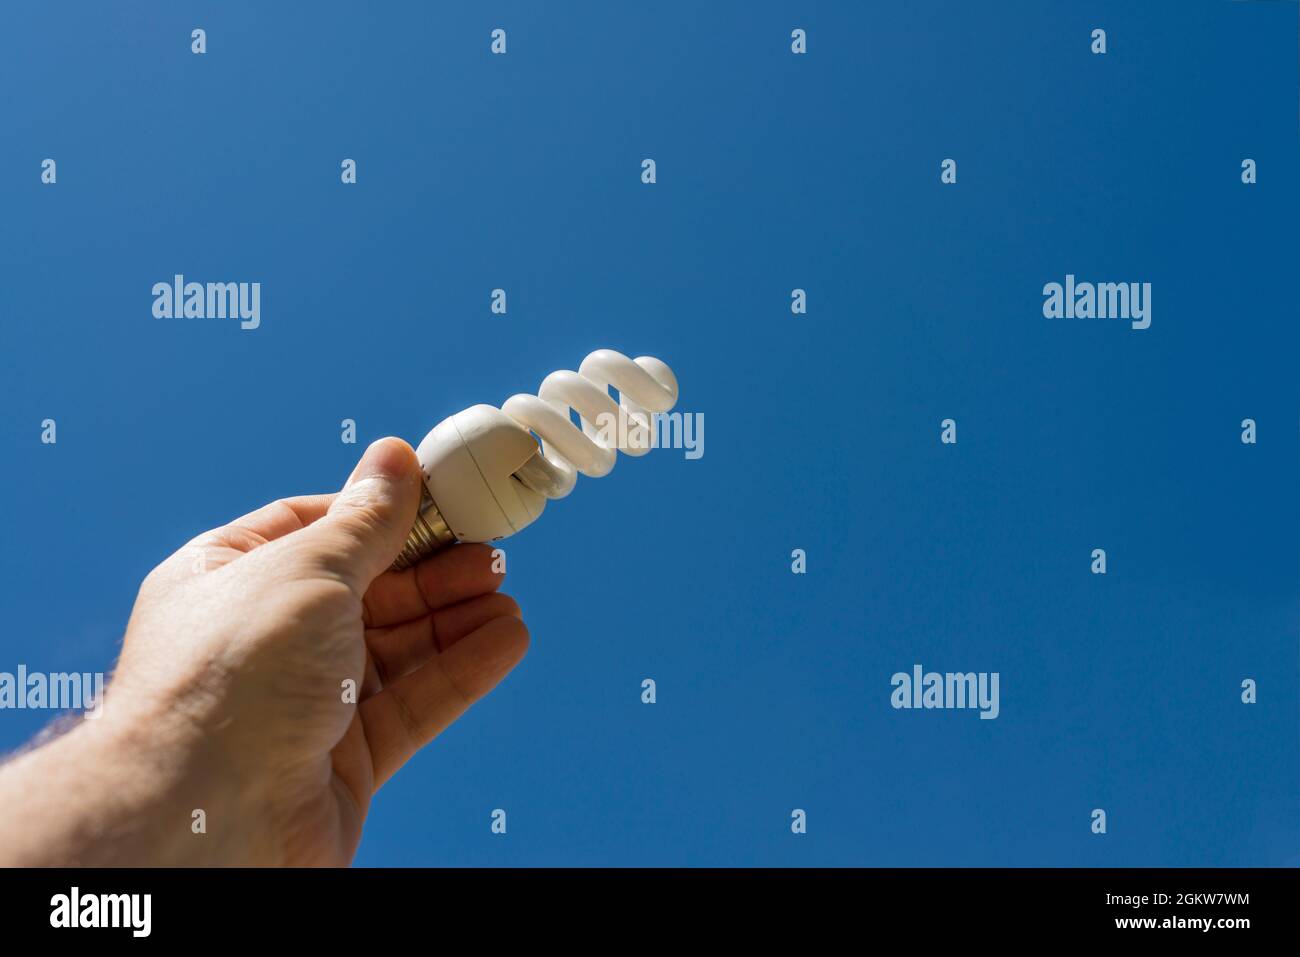 Hand holding a energy saving light bulb with a blue sky in the background. Clean energy concept. Stock Photo